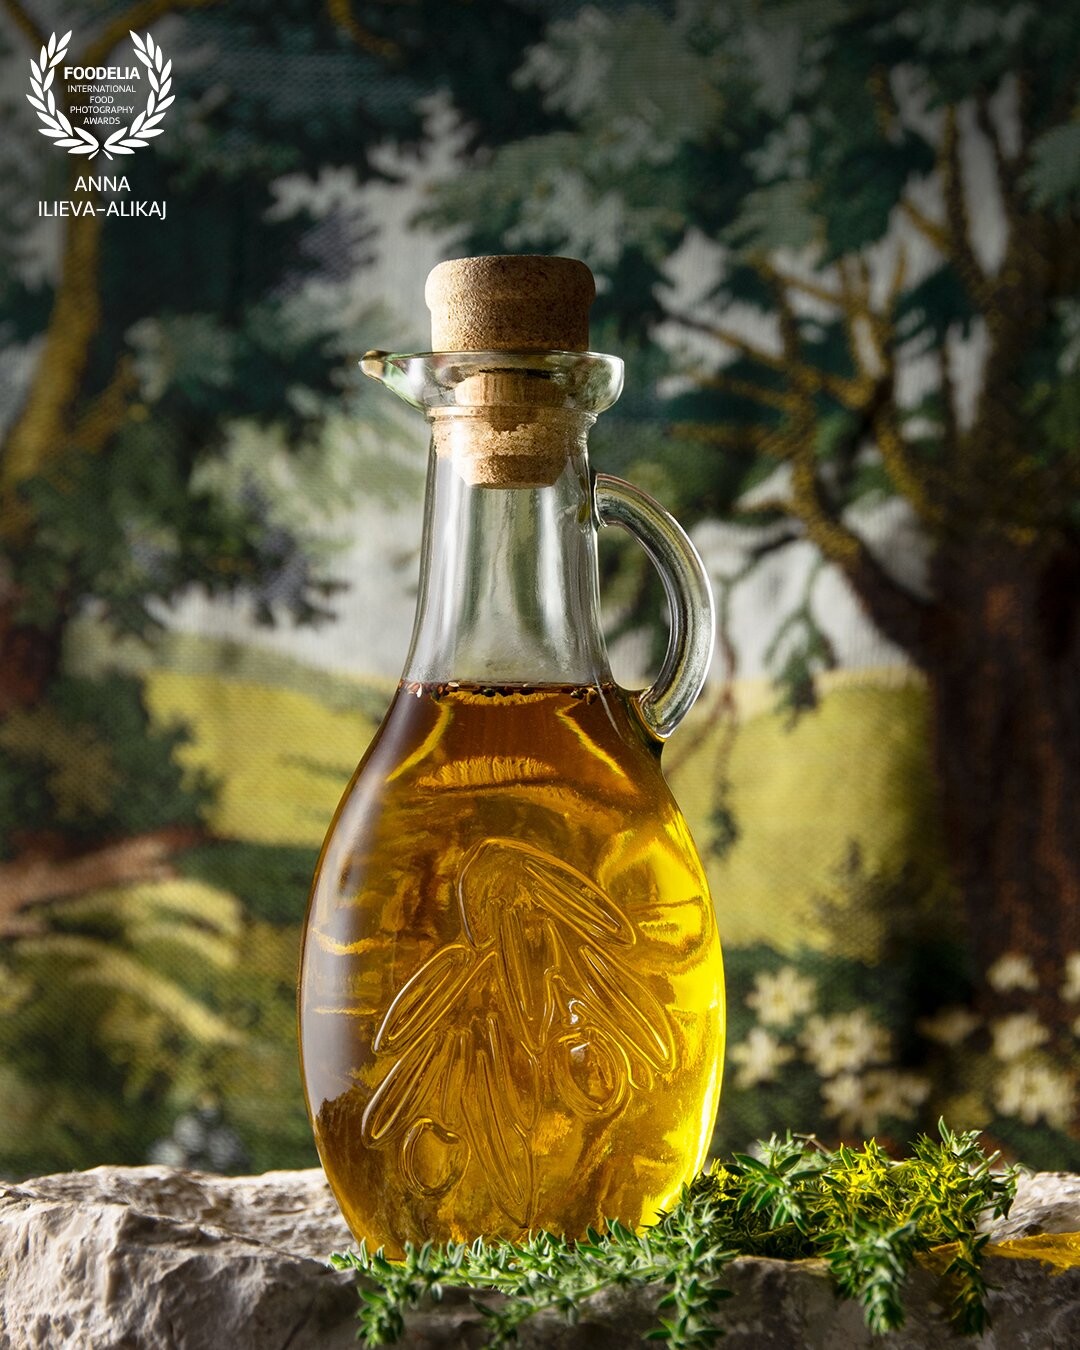 Started with the idea of representing this bottle of olive oil closest to its natural environment,  but had no possibility to take this image outdoor with real olive trees...so, I just recreated the scene in the studio, using artificial lights, natural stone and a beautifull handmade piece of vintage cloth.